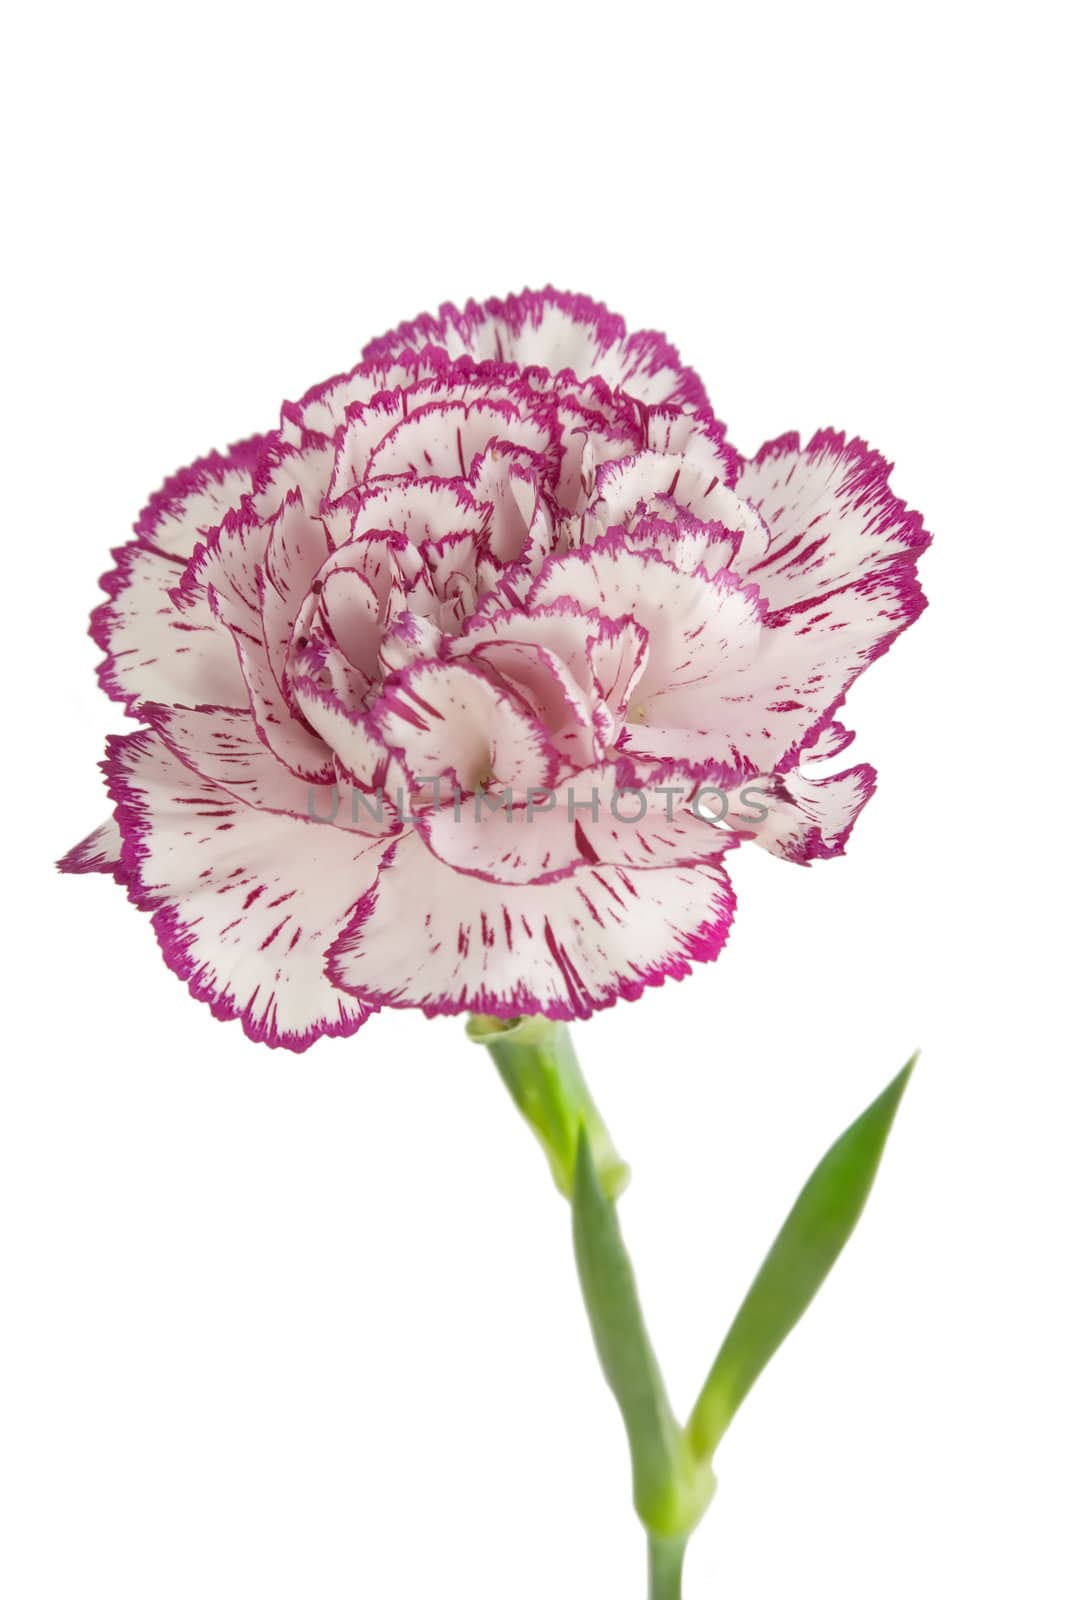 white and pink blooming carnation flower on white background